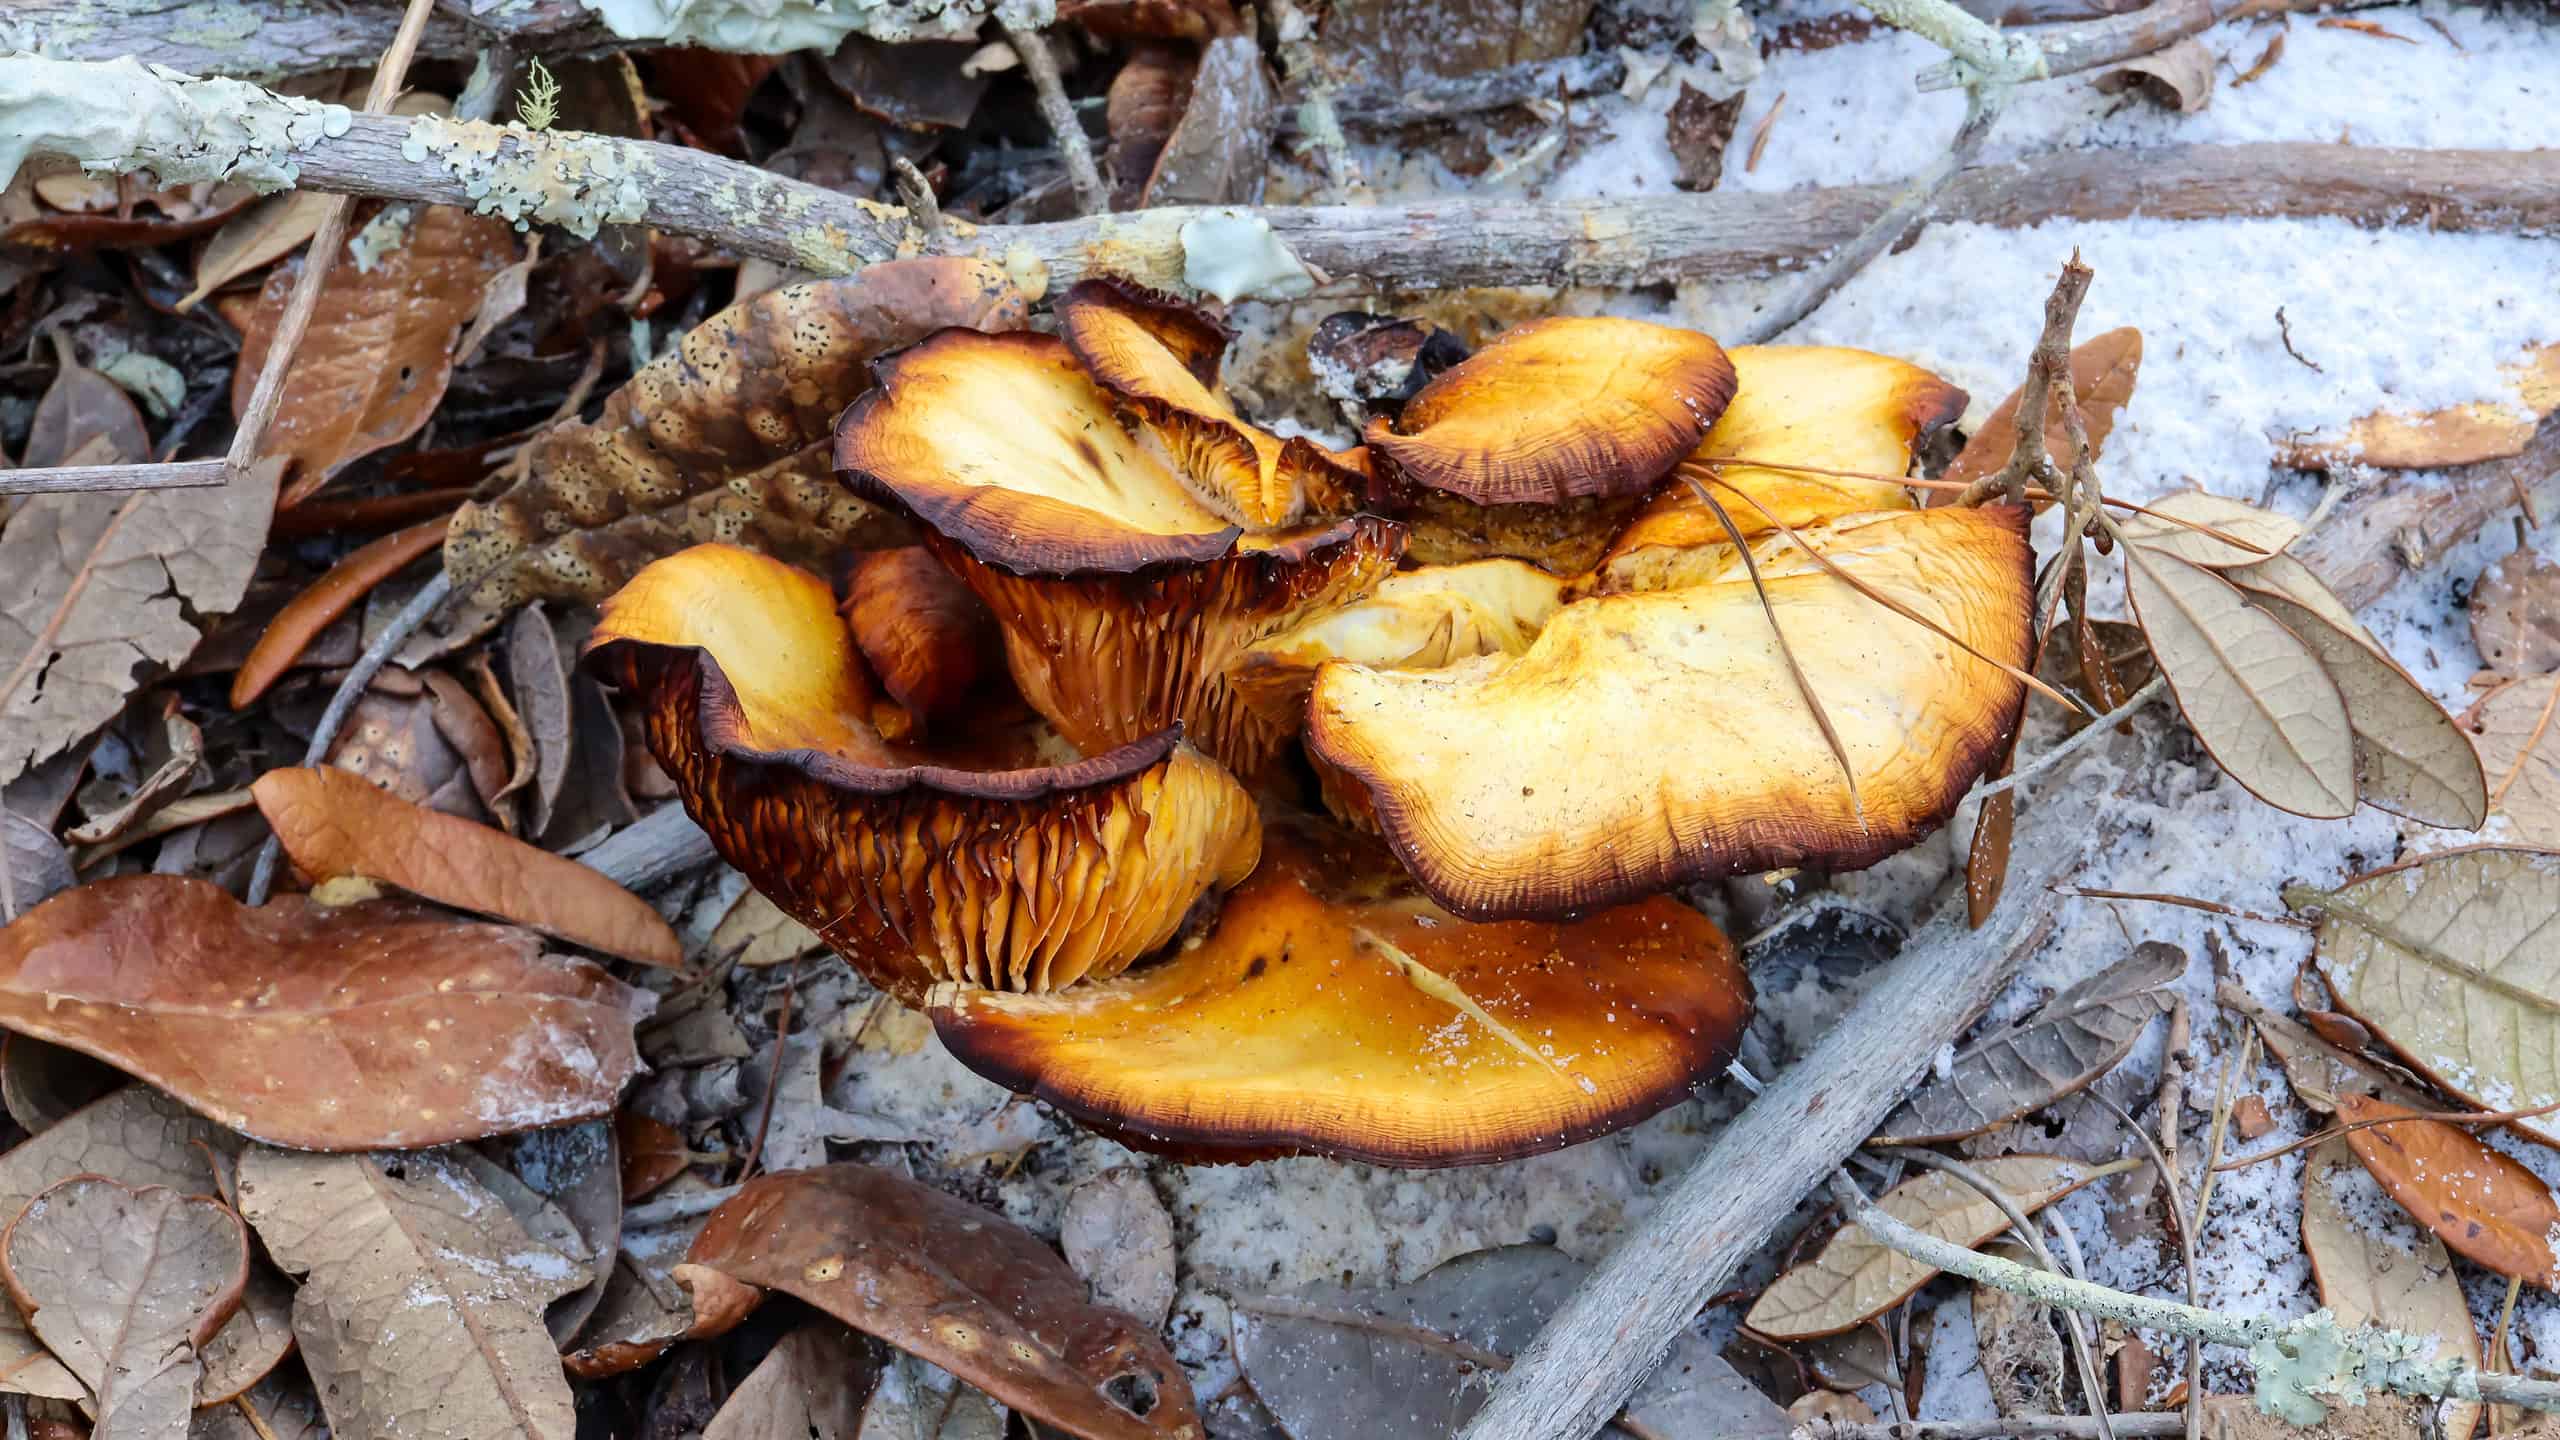 An aged Southern Jack O'Lantern mushroom cluster (Omphalotus subilludens) growing on a fallen branch in Florida. The darker color and darker edges can appear as the mushroom gets older.